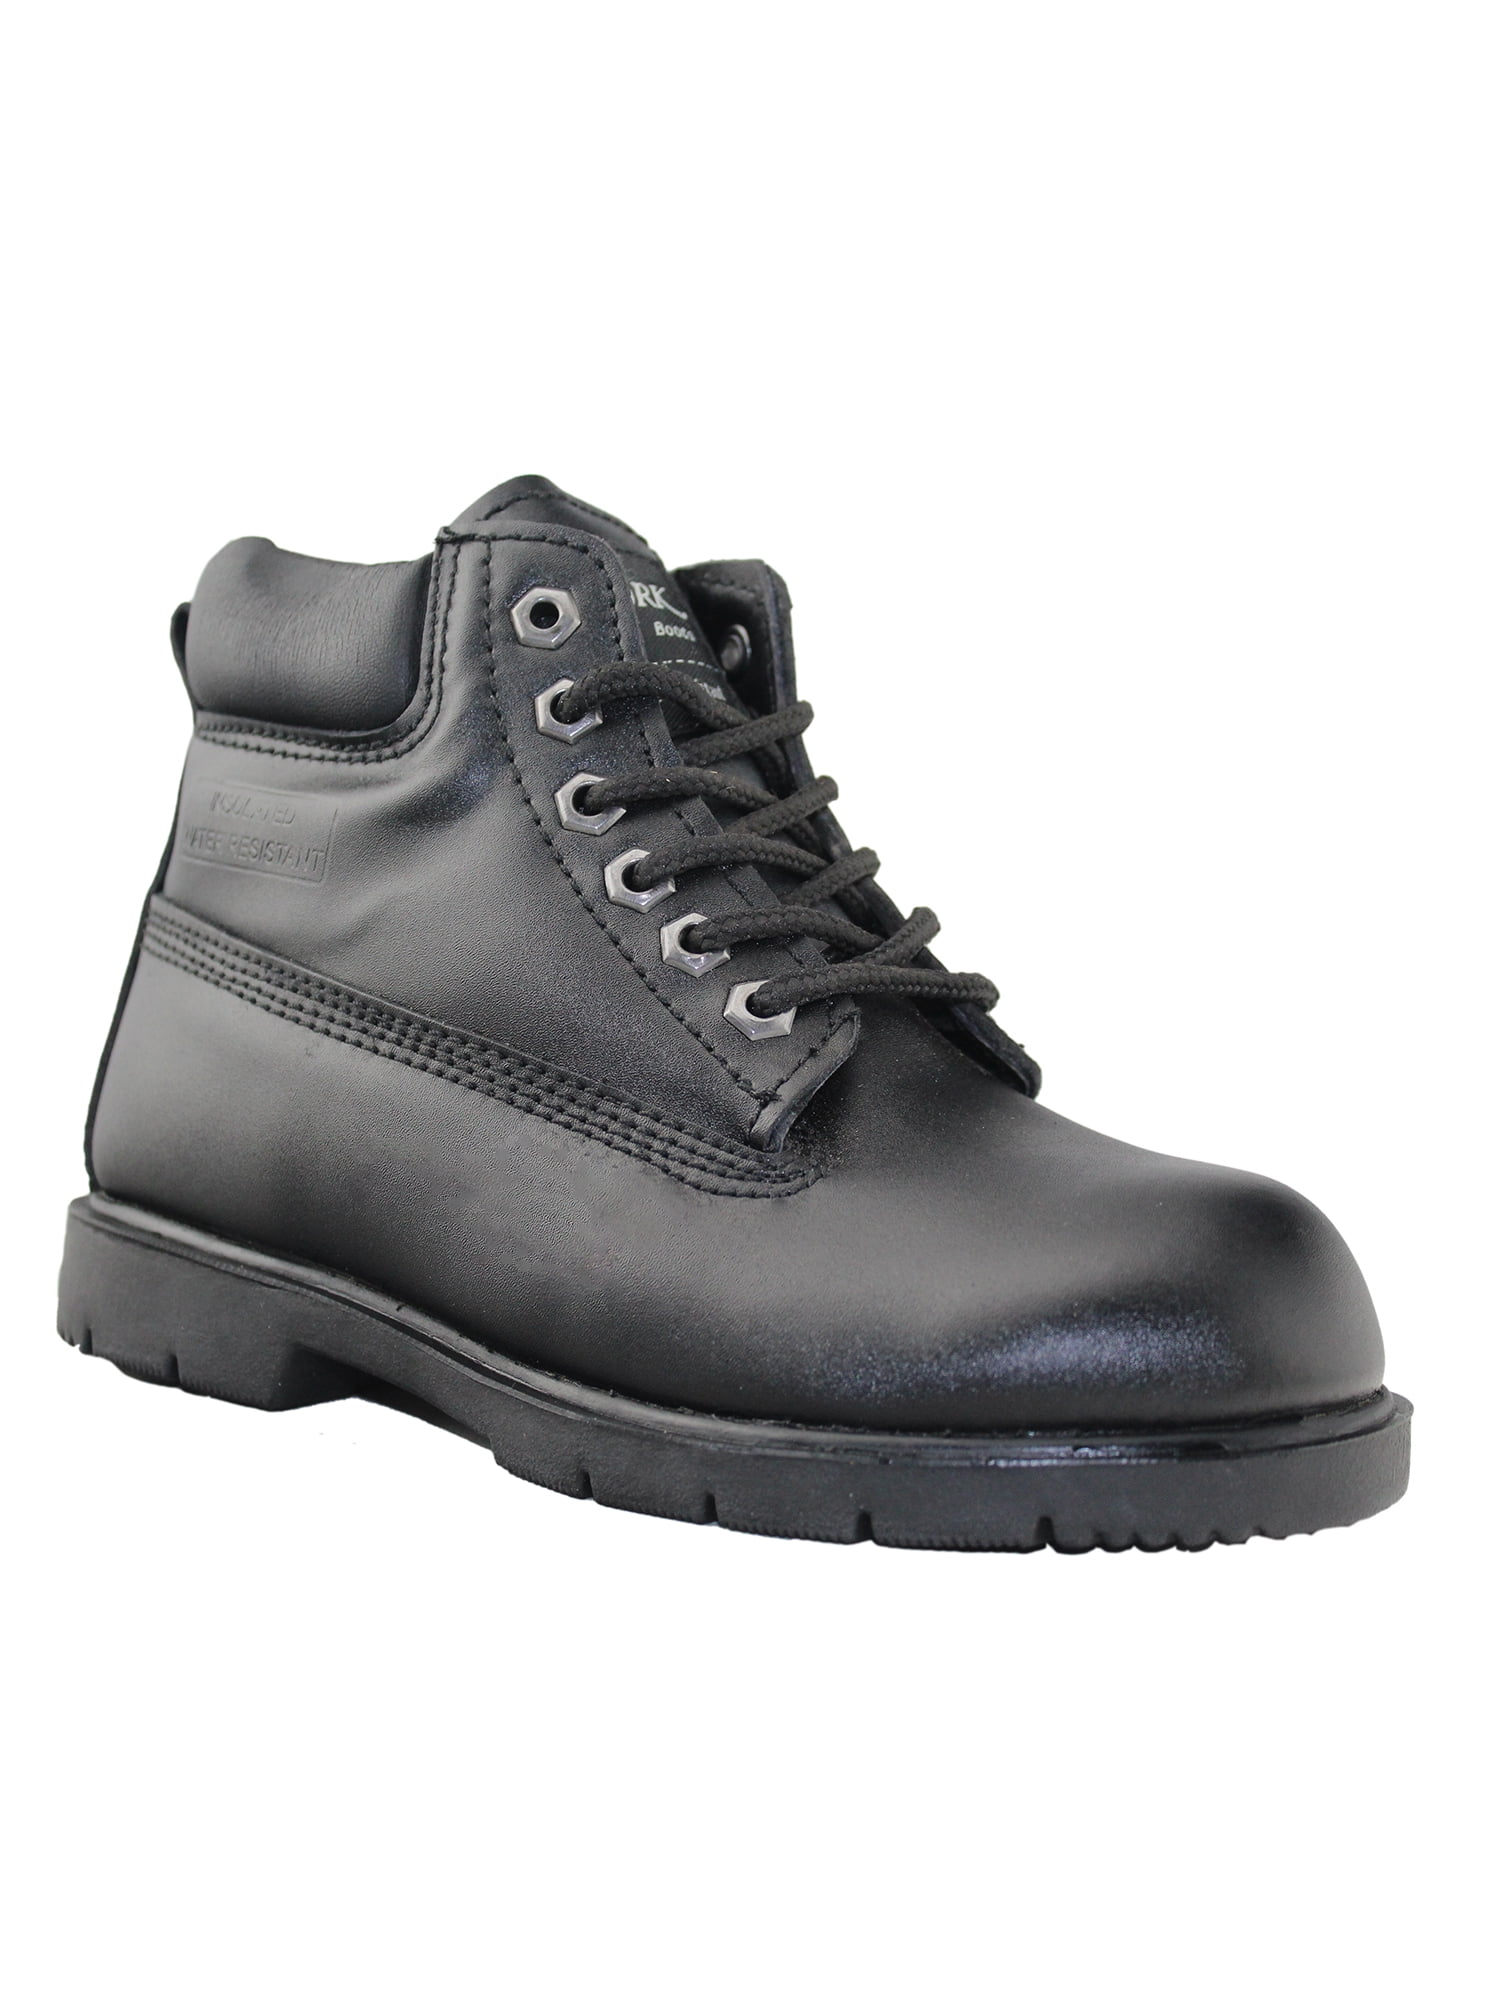 boys leather work boots